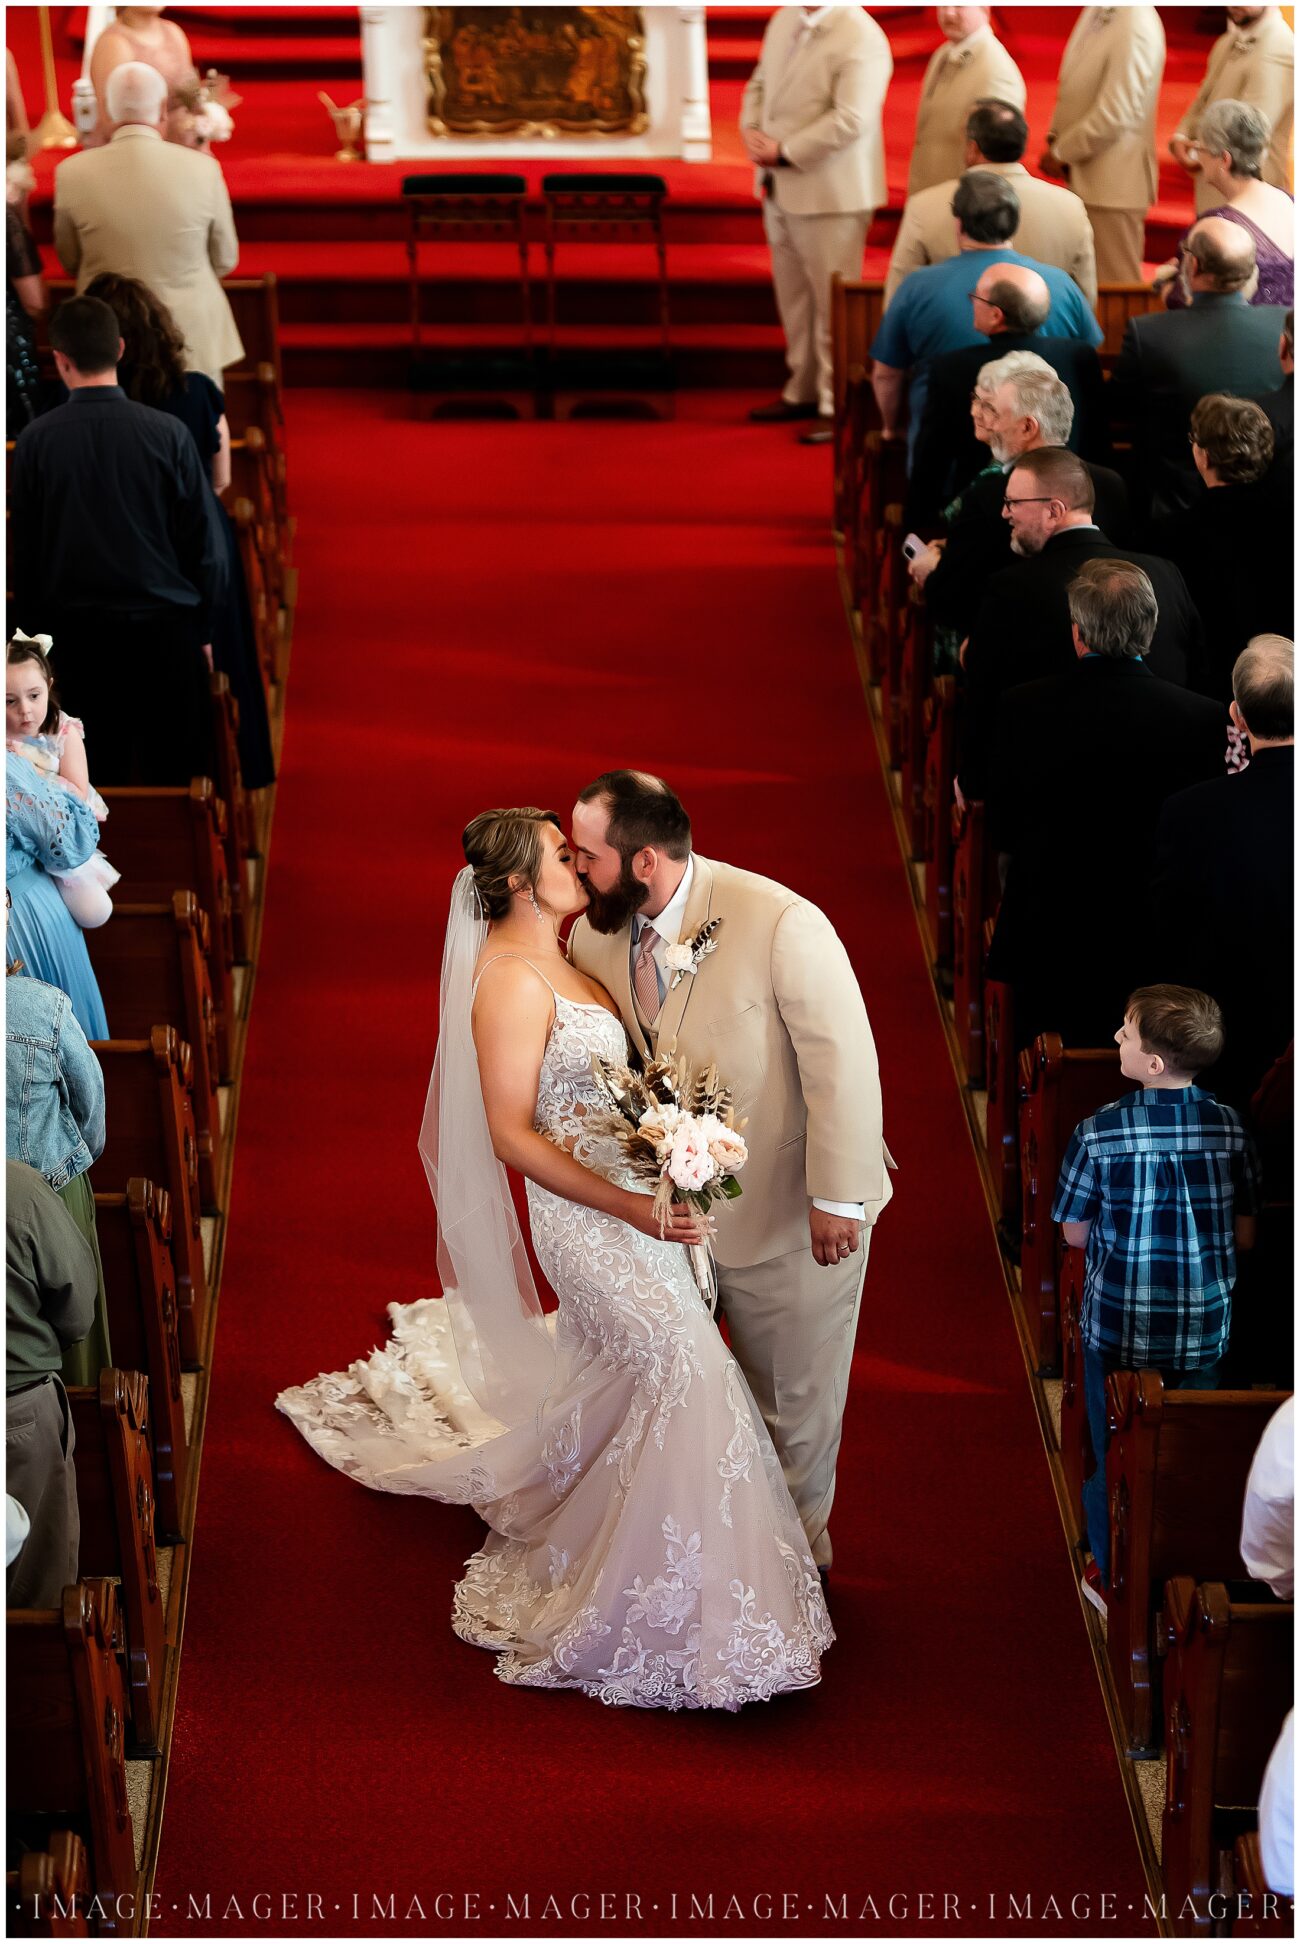 A small town wedding for Casey and Adam. The bride and groom share a kiss while walking back up the aisle after their wedding ceremony.

Saint John the Baptist Catholic Church, L'erable, IL. 

Photo taken by Mager Image Photography.